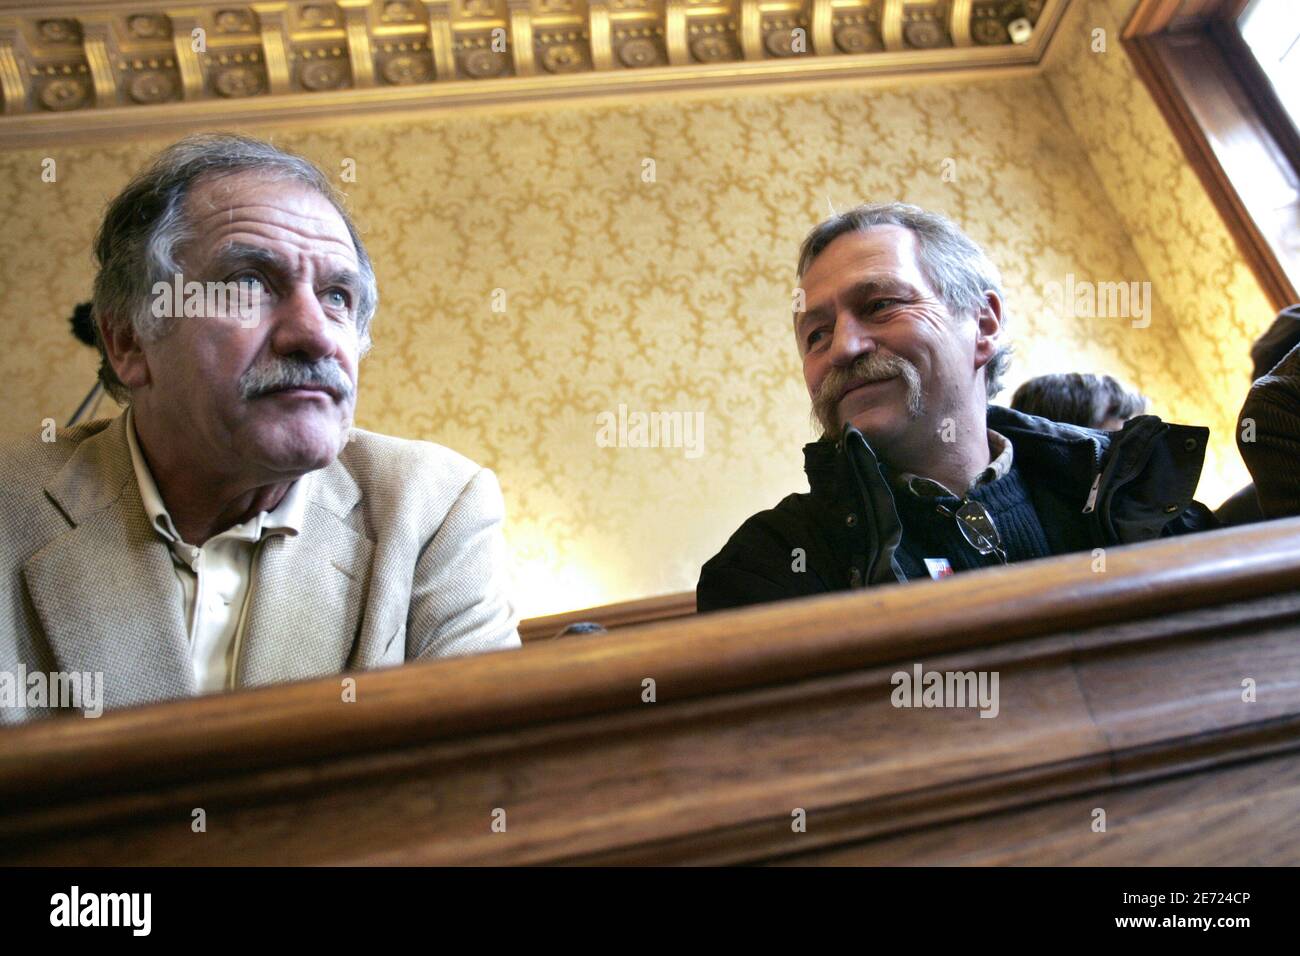 Jose Bove and Noel Mamere appear at Paris court on february 7, 2007. The appeals court upheld a verdict and four-month jail sentence for French farmer and anti-globalization activist Jose Bove for destroying a field of genetically modified corn. Bove, who wants to run in France's presidential elections this year, was sentenced in 2005 for destroying a field of corn planted by U.S. seed company Pioneer Hi-Bred. Photo by Thibault Camus/ABACAPRESS.COM Stock Photo